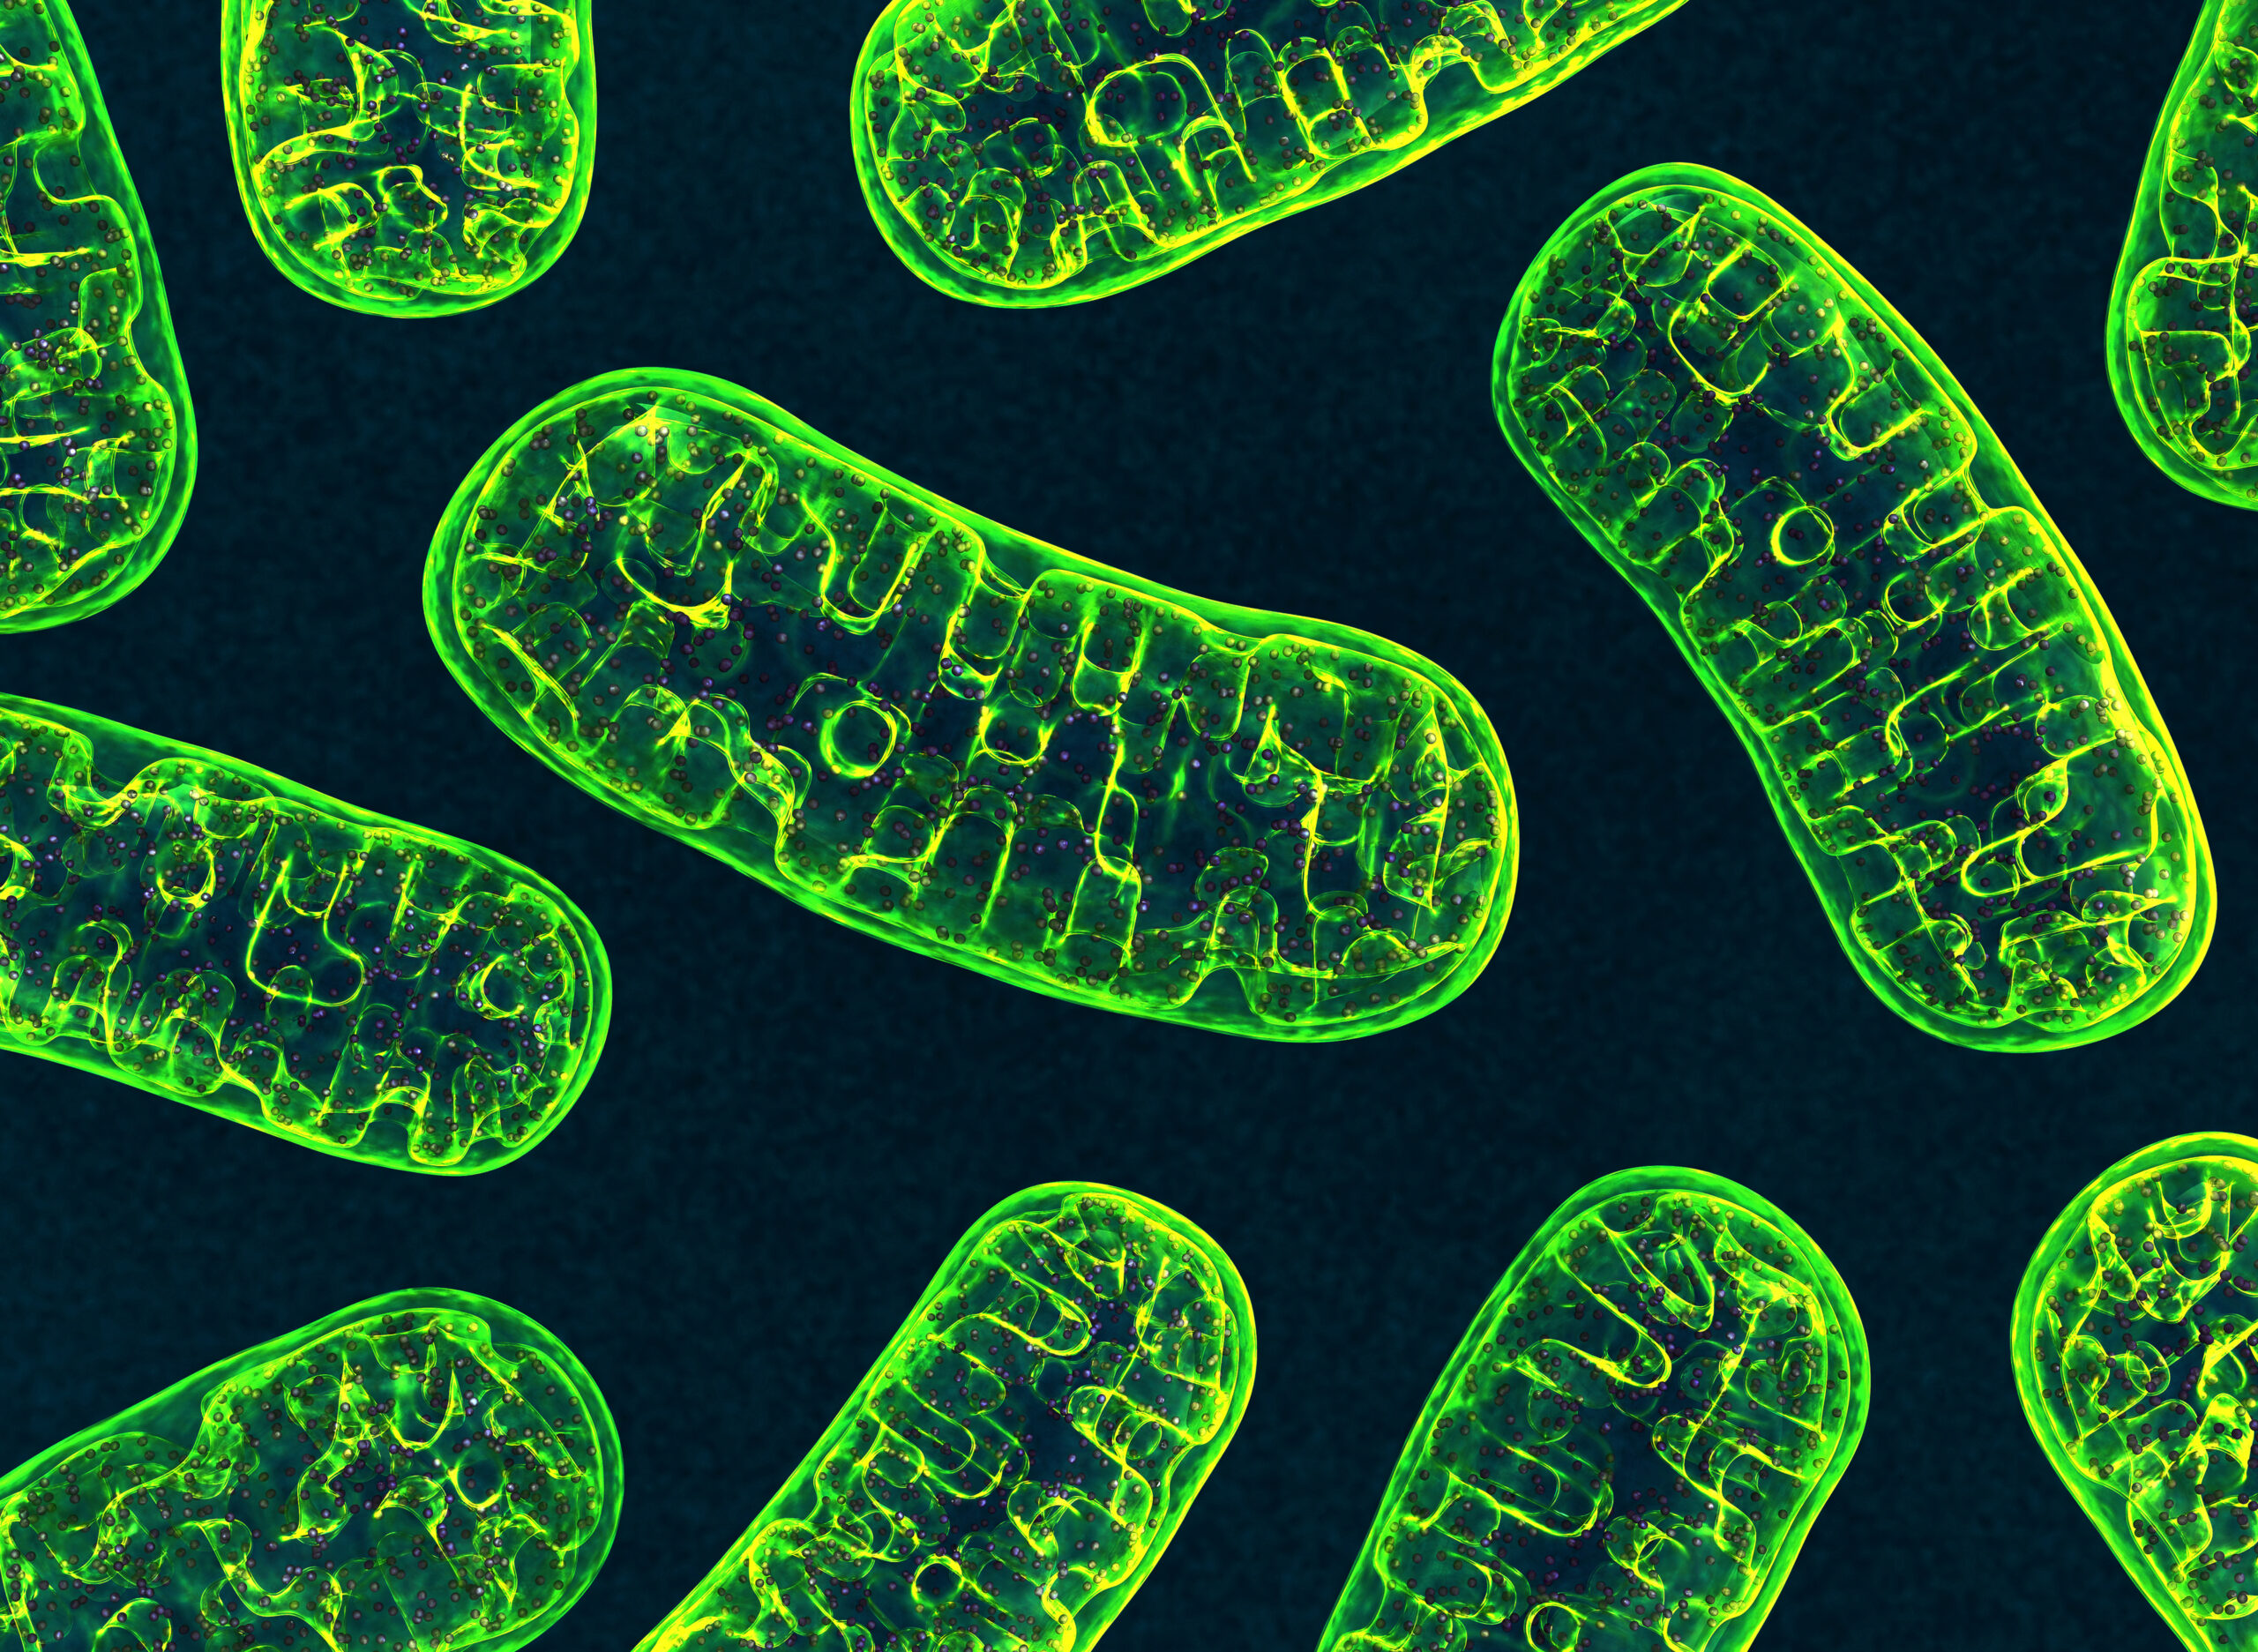 New cell pathways connected with defects in mitochondria